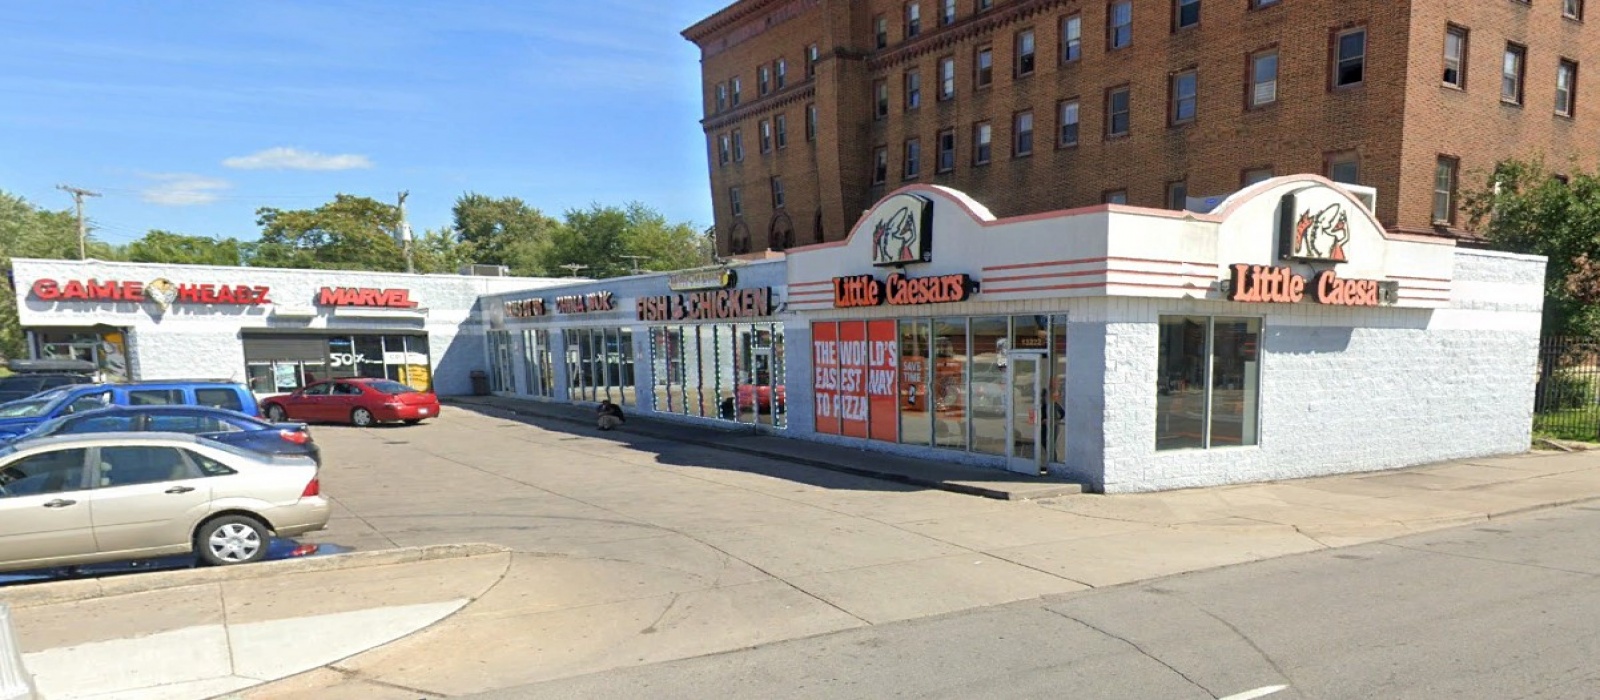 13222 Woodward Ave, Highland Park, Michigan 48203, ,Retail,For Lease,13222 Woodward Ave,1006